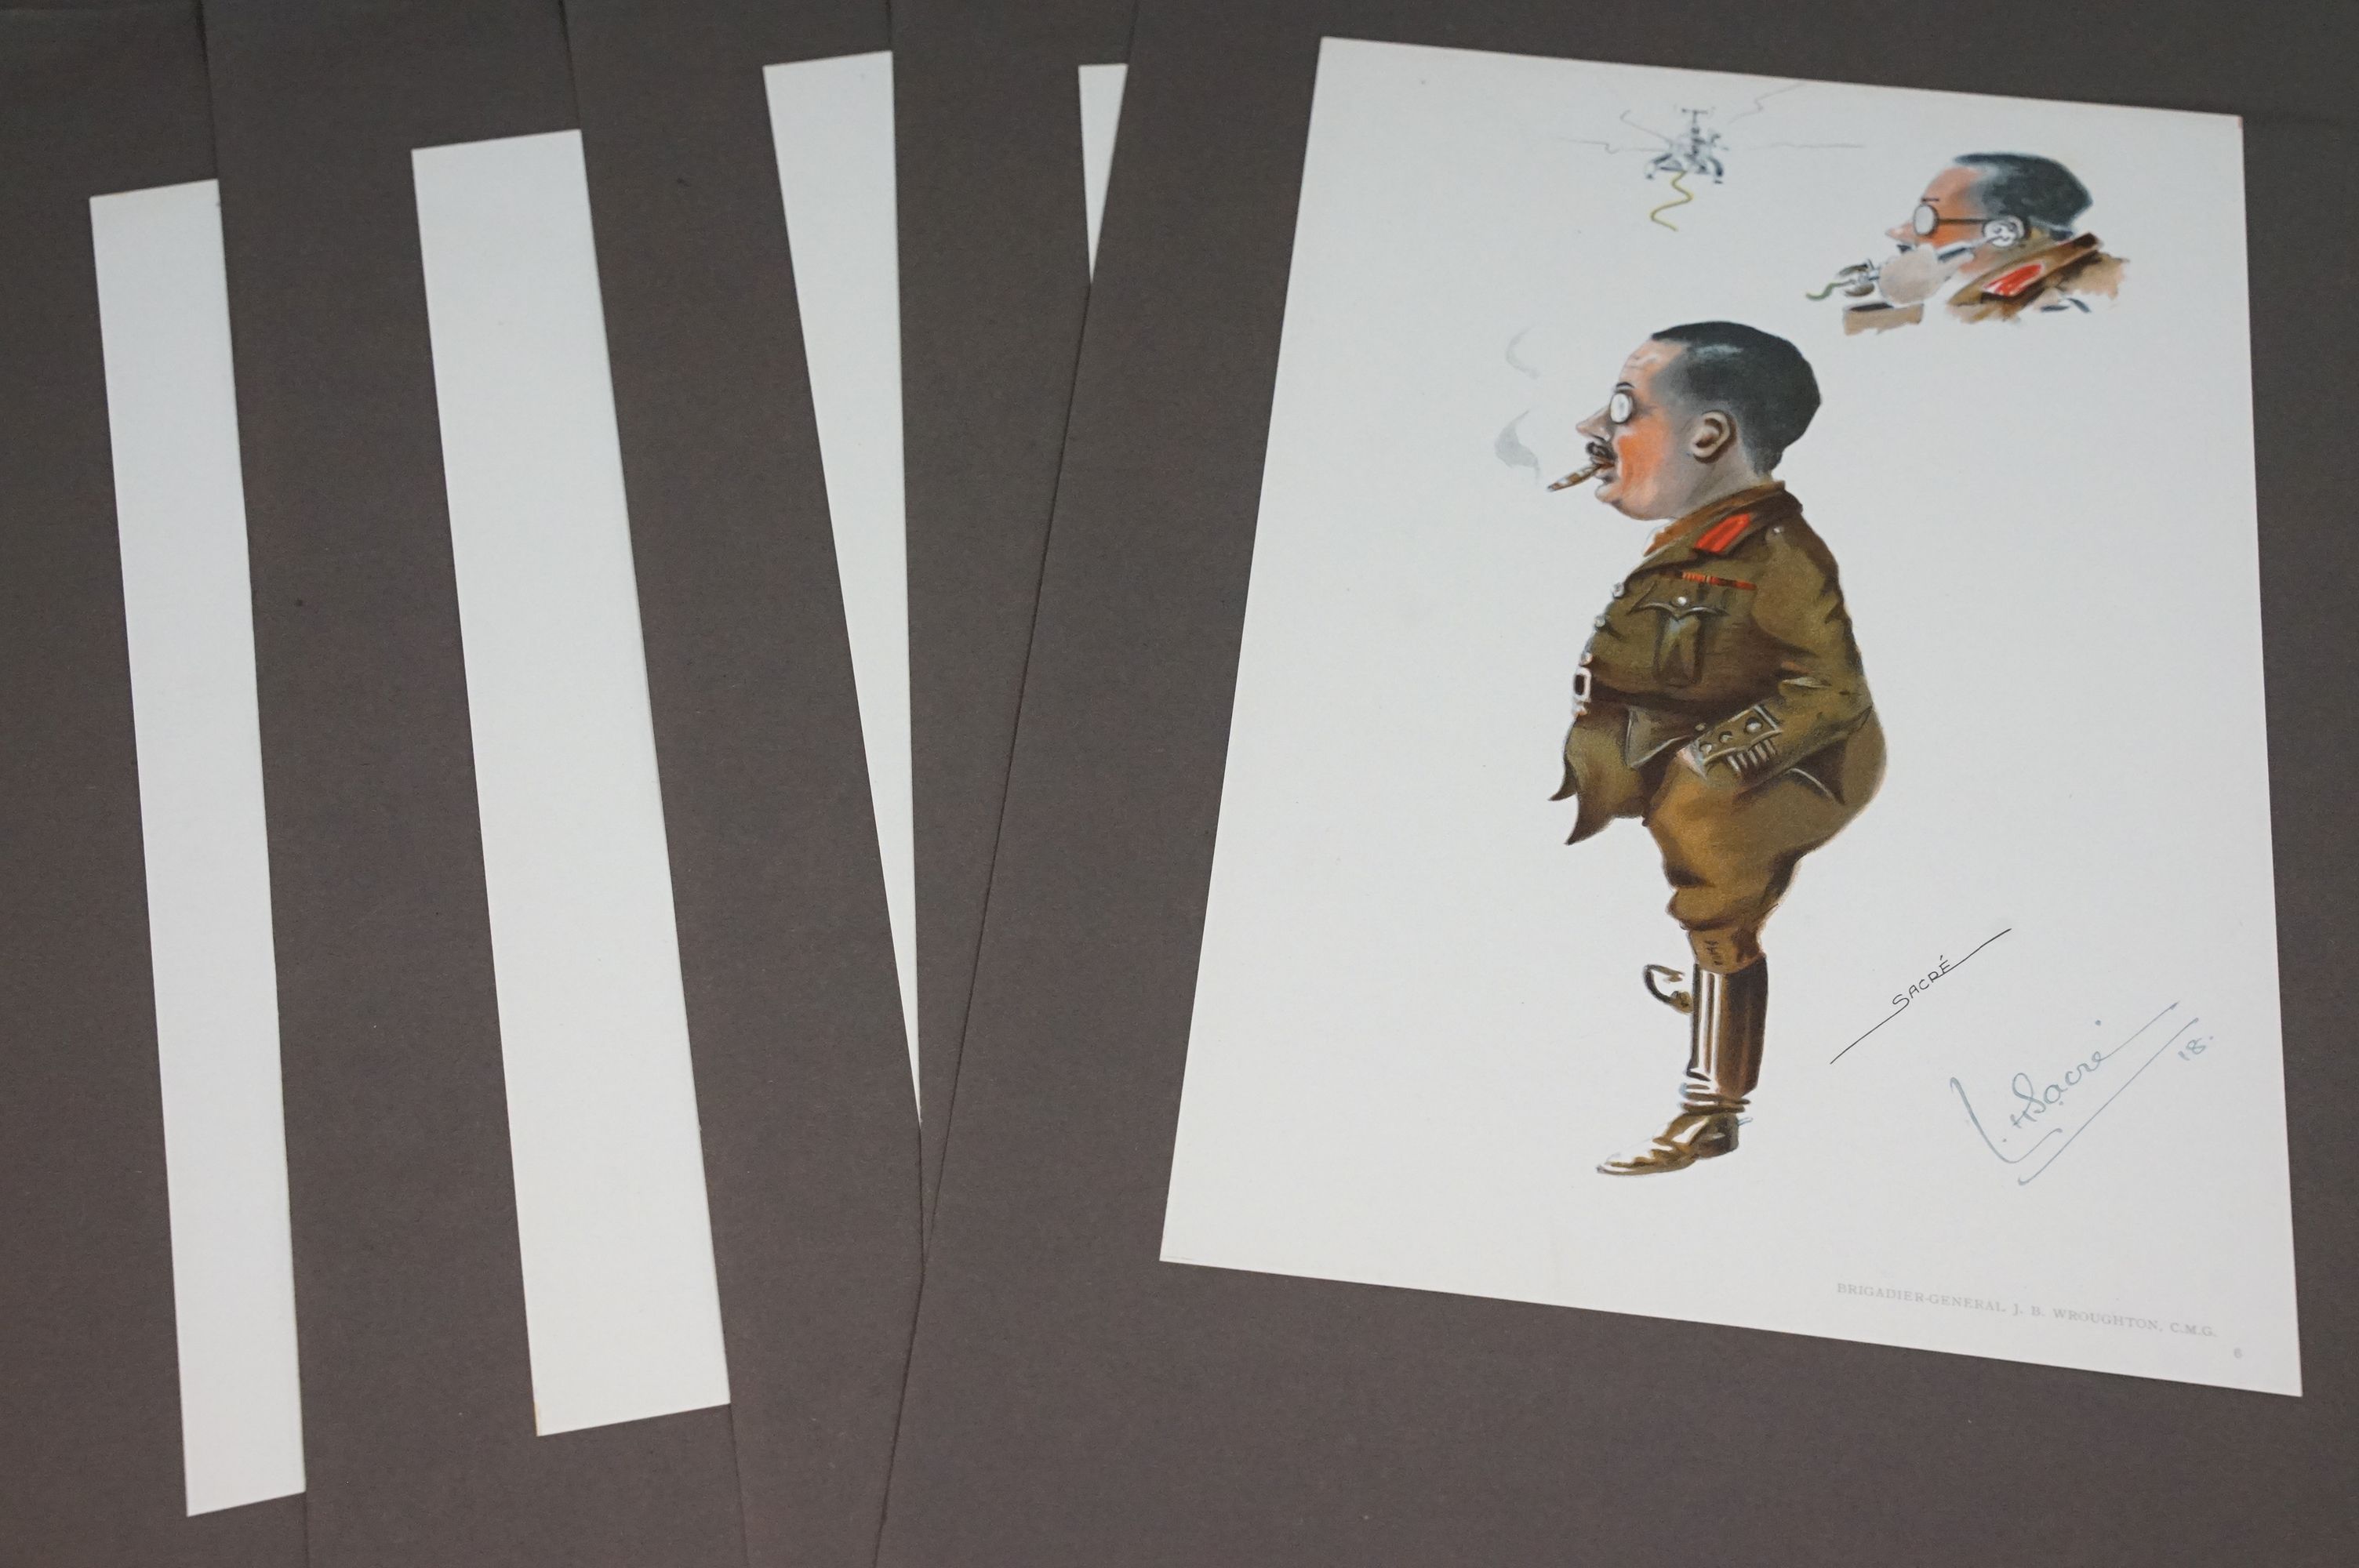 Lester Howard Sacré (1892 - 1974), Sidelights by Sacré, set of caricatures of British military - Image 6 of 7